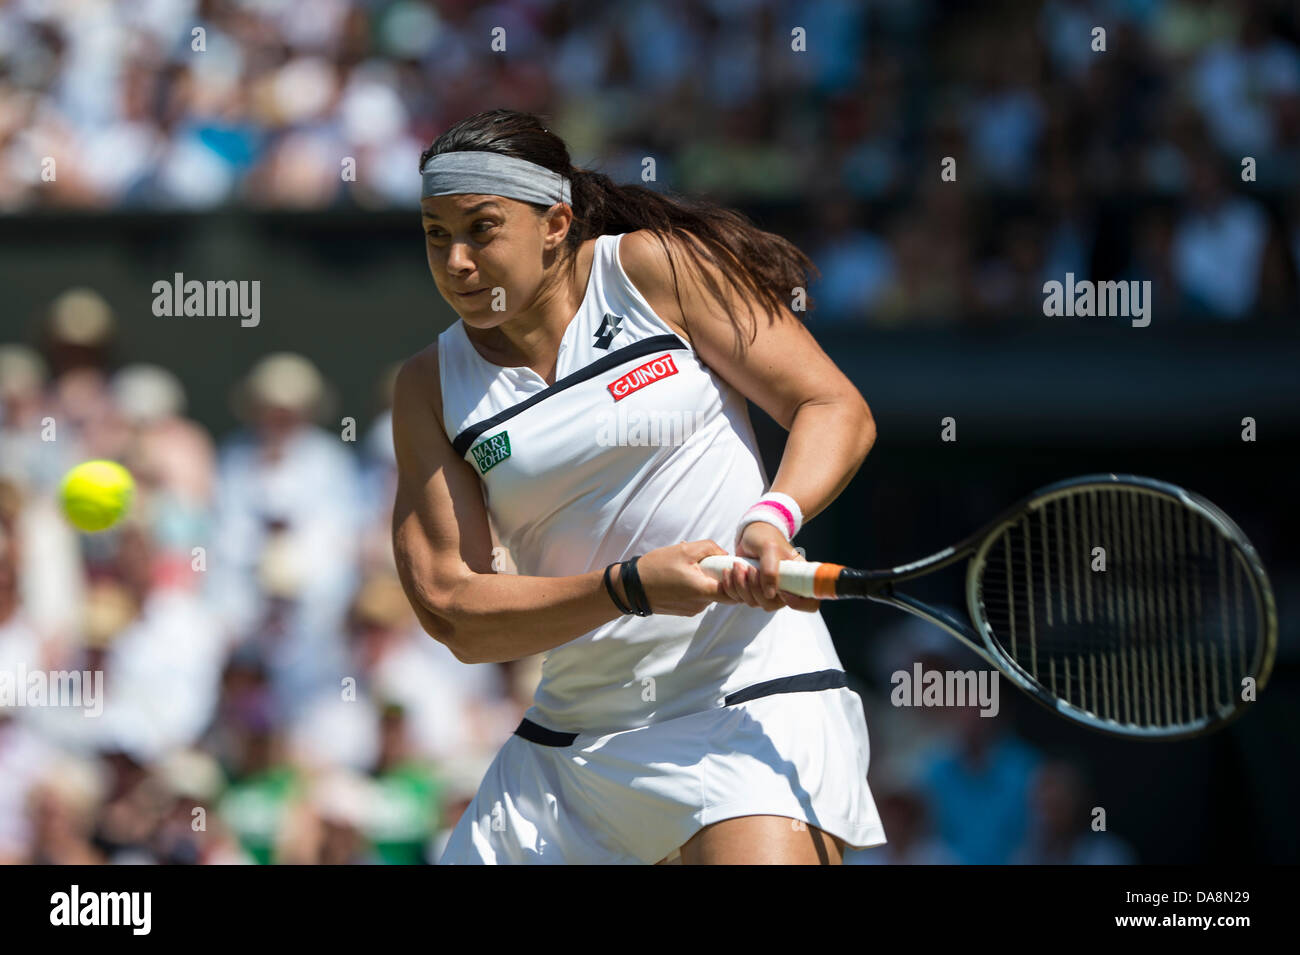 Tennis: Wimbledon Championship 2013, Marion Bartoli of France in action during the Ladies' Singles final match against Sabine Lisicki of Germany on day twelve of the Wimbledon Lawn Tennis Championships at the All England Lawn Tennis and Croquet Club on July 6, 2013 in London, England. Credit:  dpa picture alliance/Alamy Live News Stock Photo